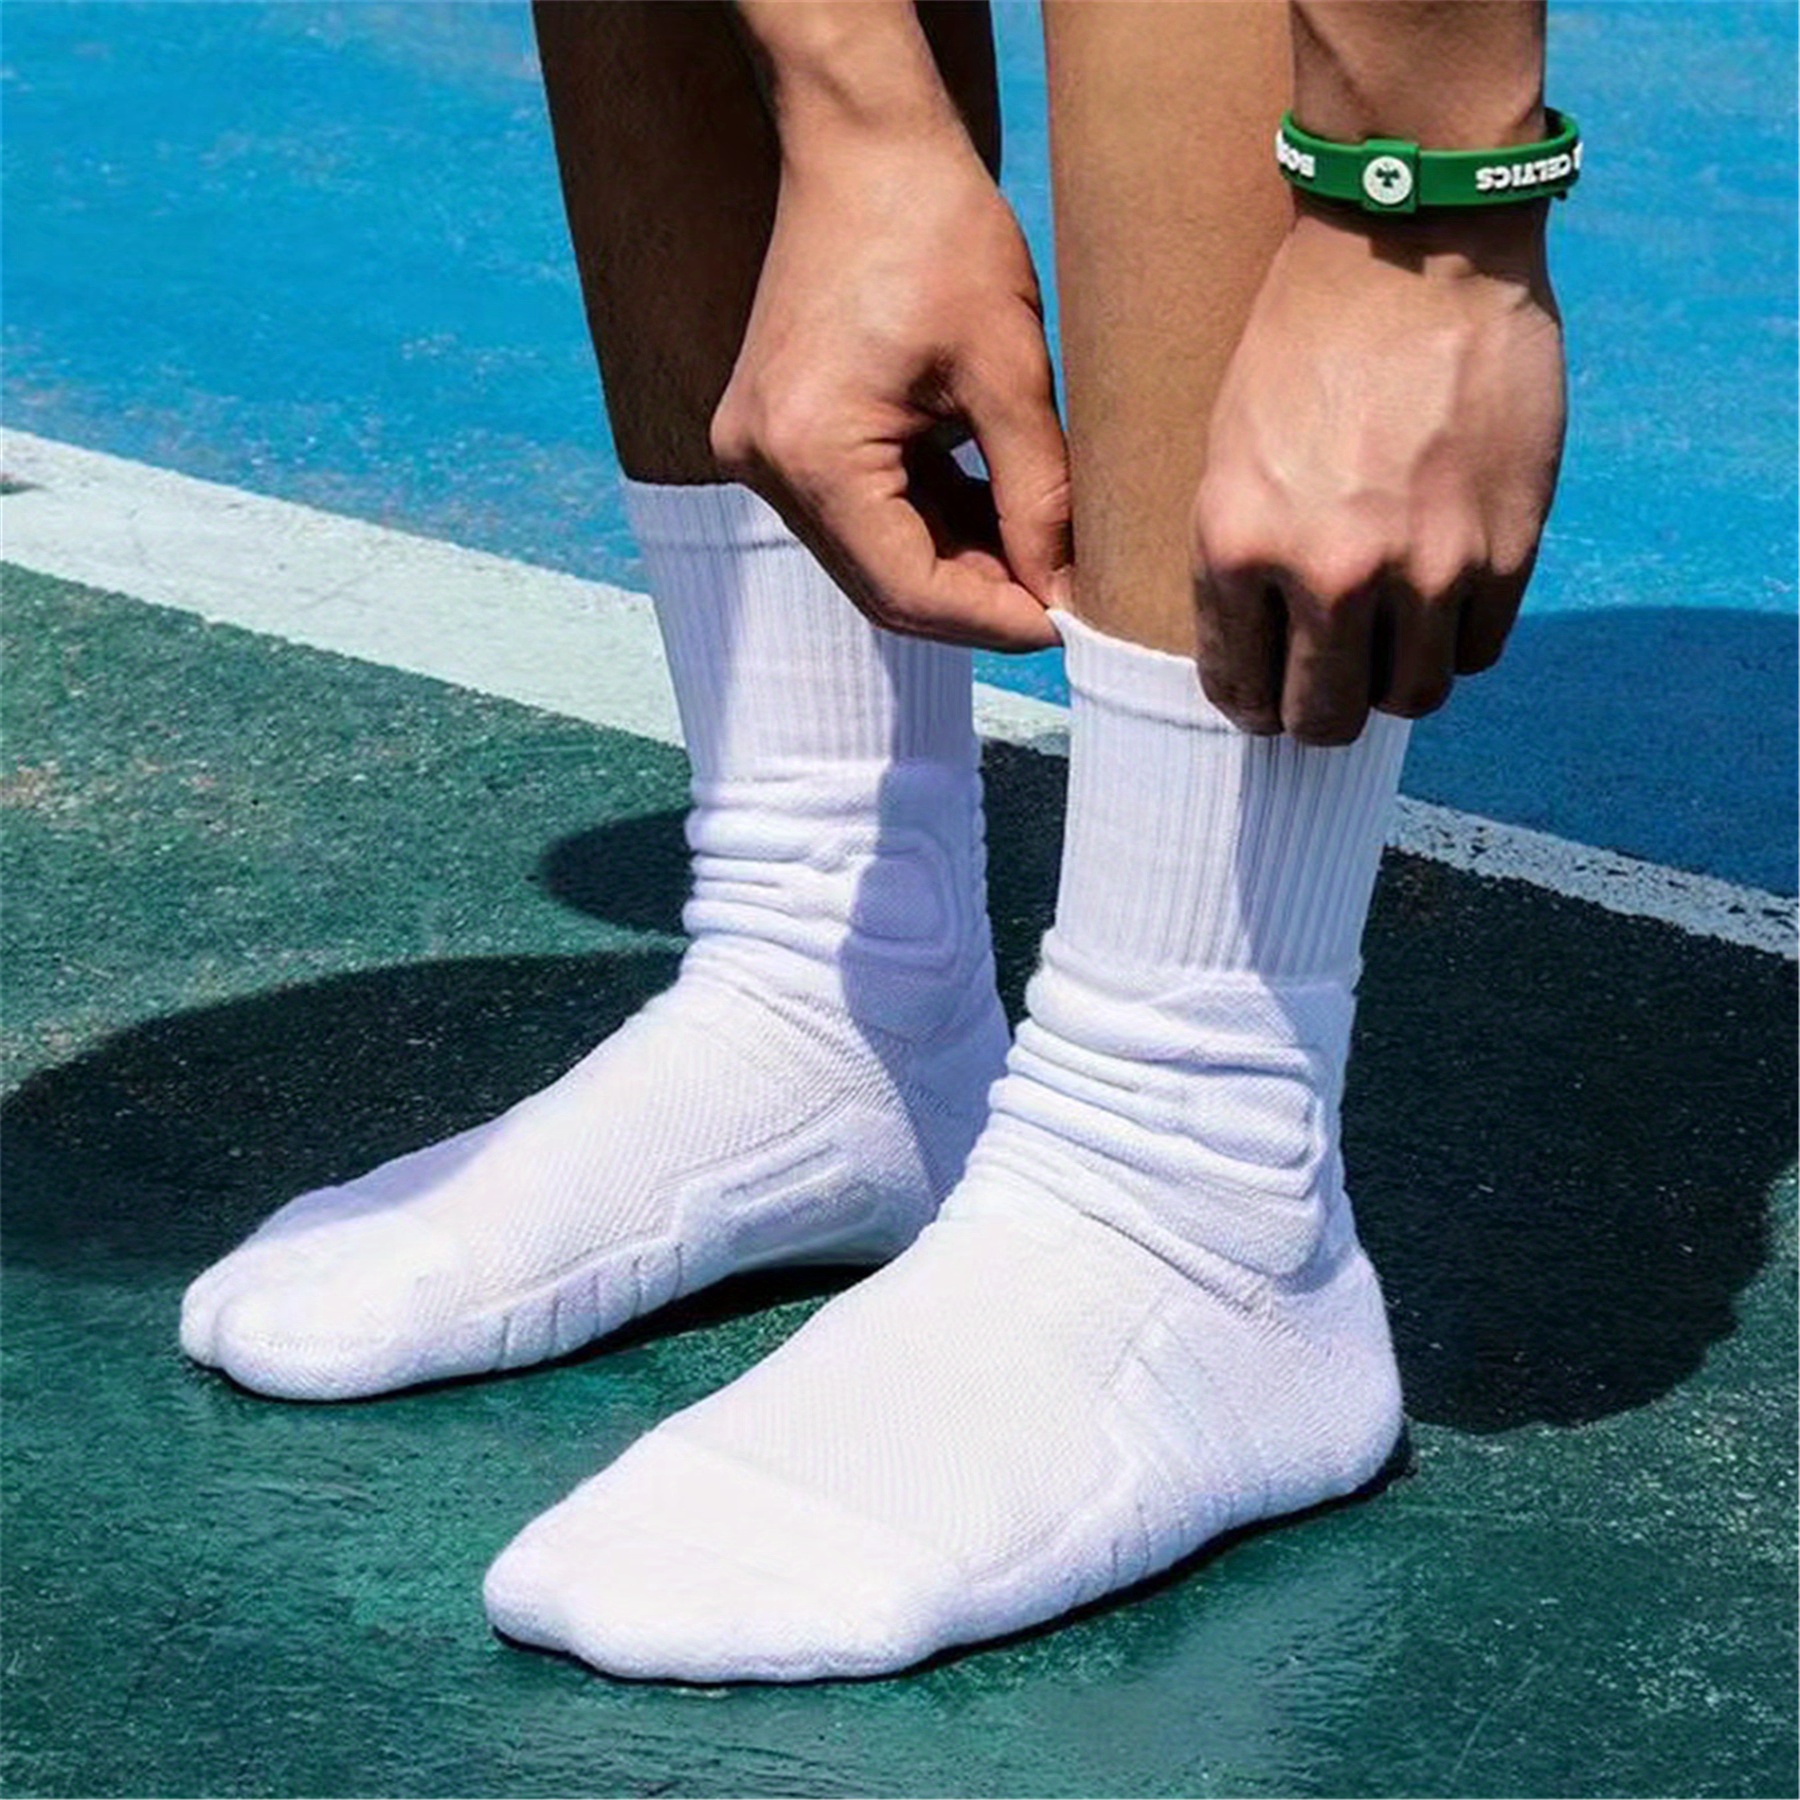 Basketball Socks: When & How to Wear Them – The Fashionisto